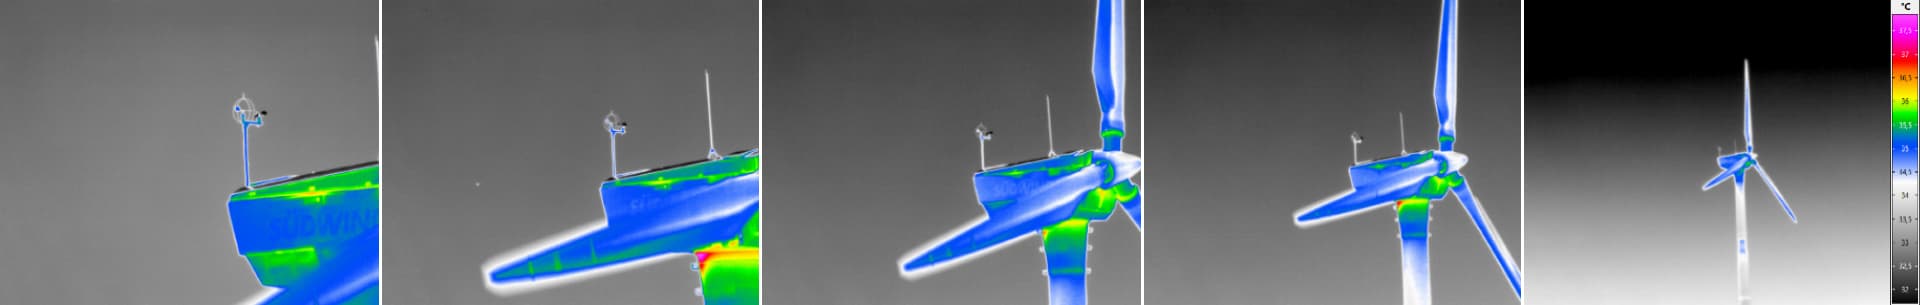 Infrared image of a wind turbine, different zoom levels